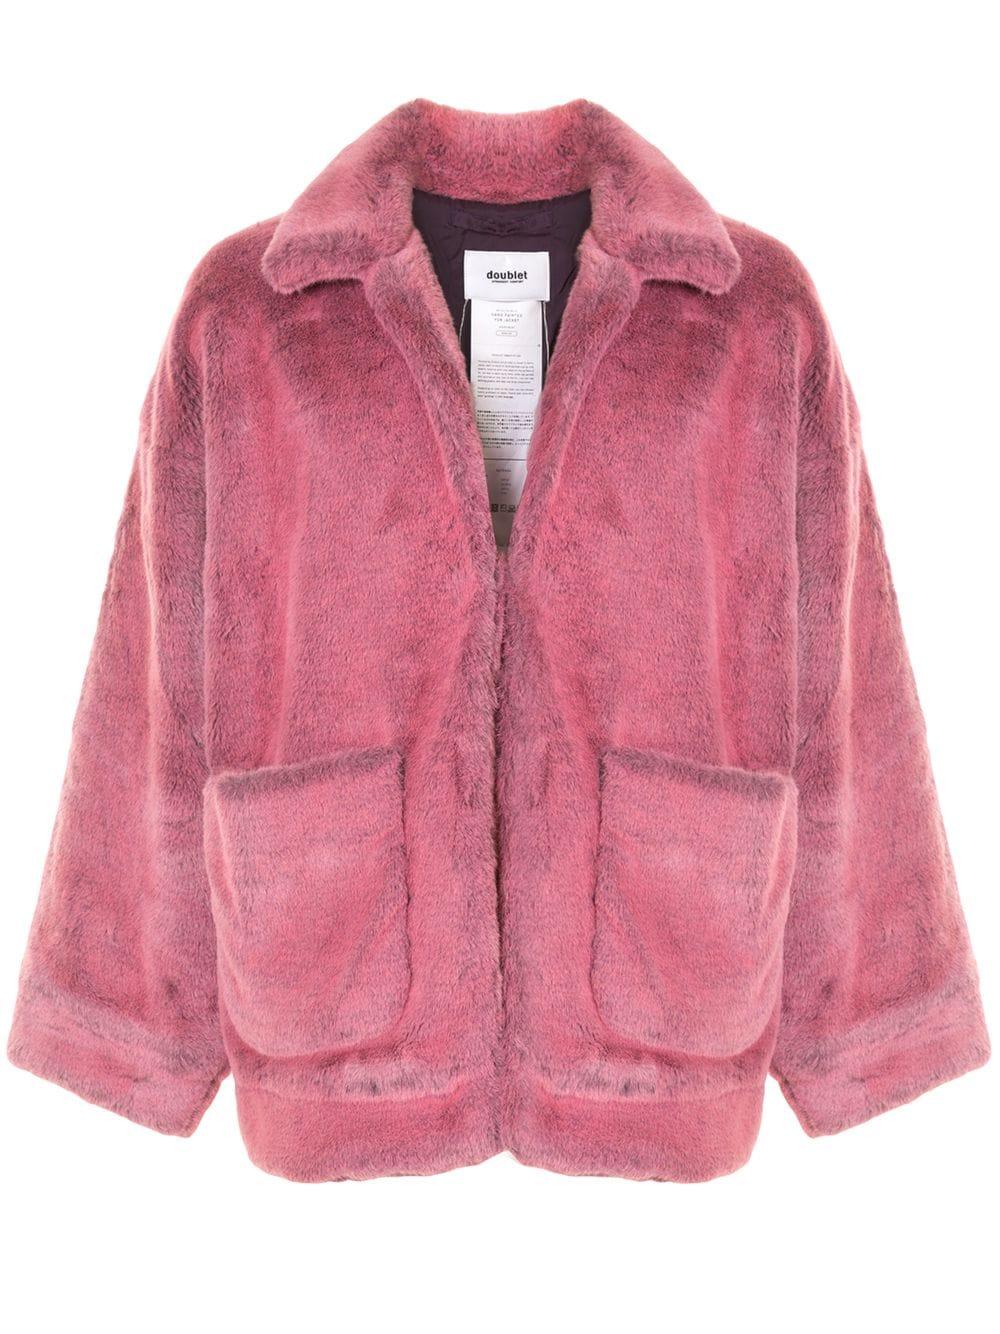 Doublet Hand Painted Faux-fur Jacket in Pink for Men - Lyst